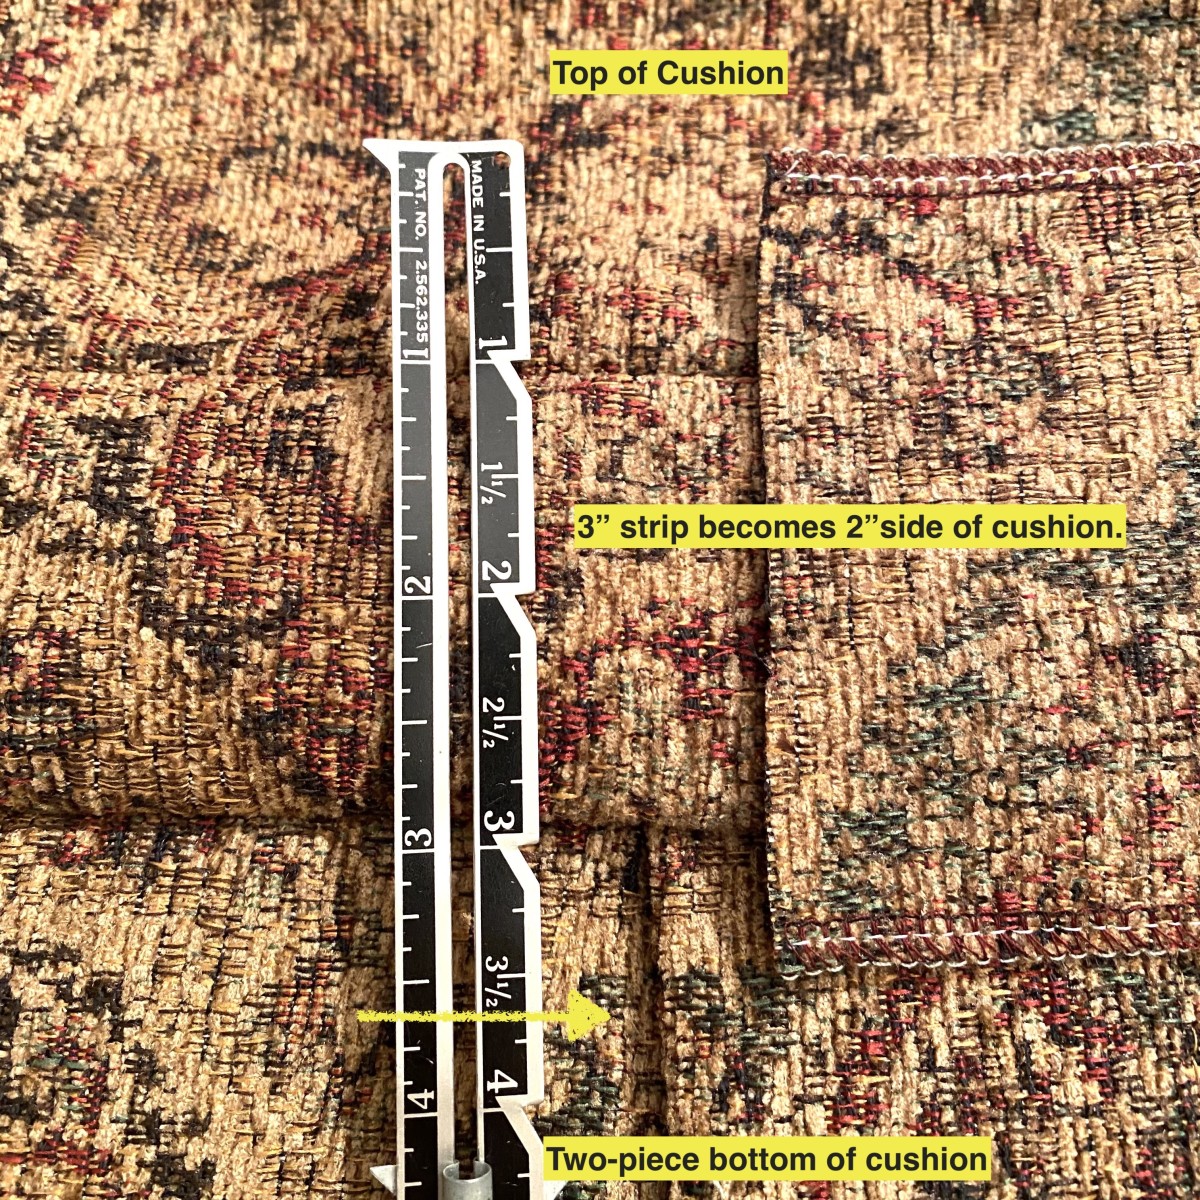 Here is the top, bottom, and the 3" strip that has become the 2" sidewall of the cushion. You can detect the sham style hemmed opening on the bottom piece.